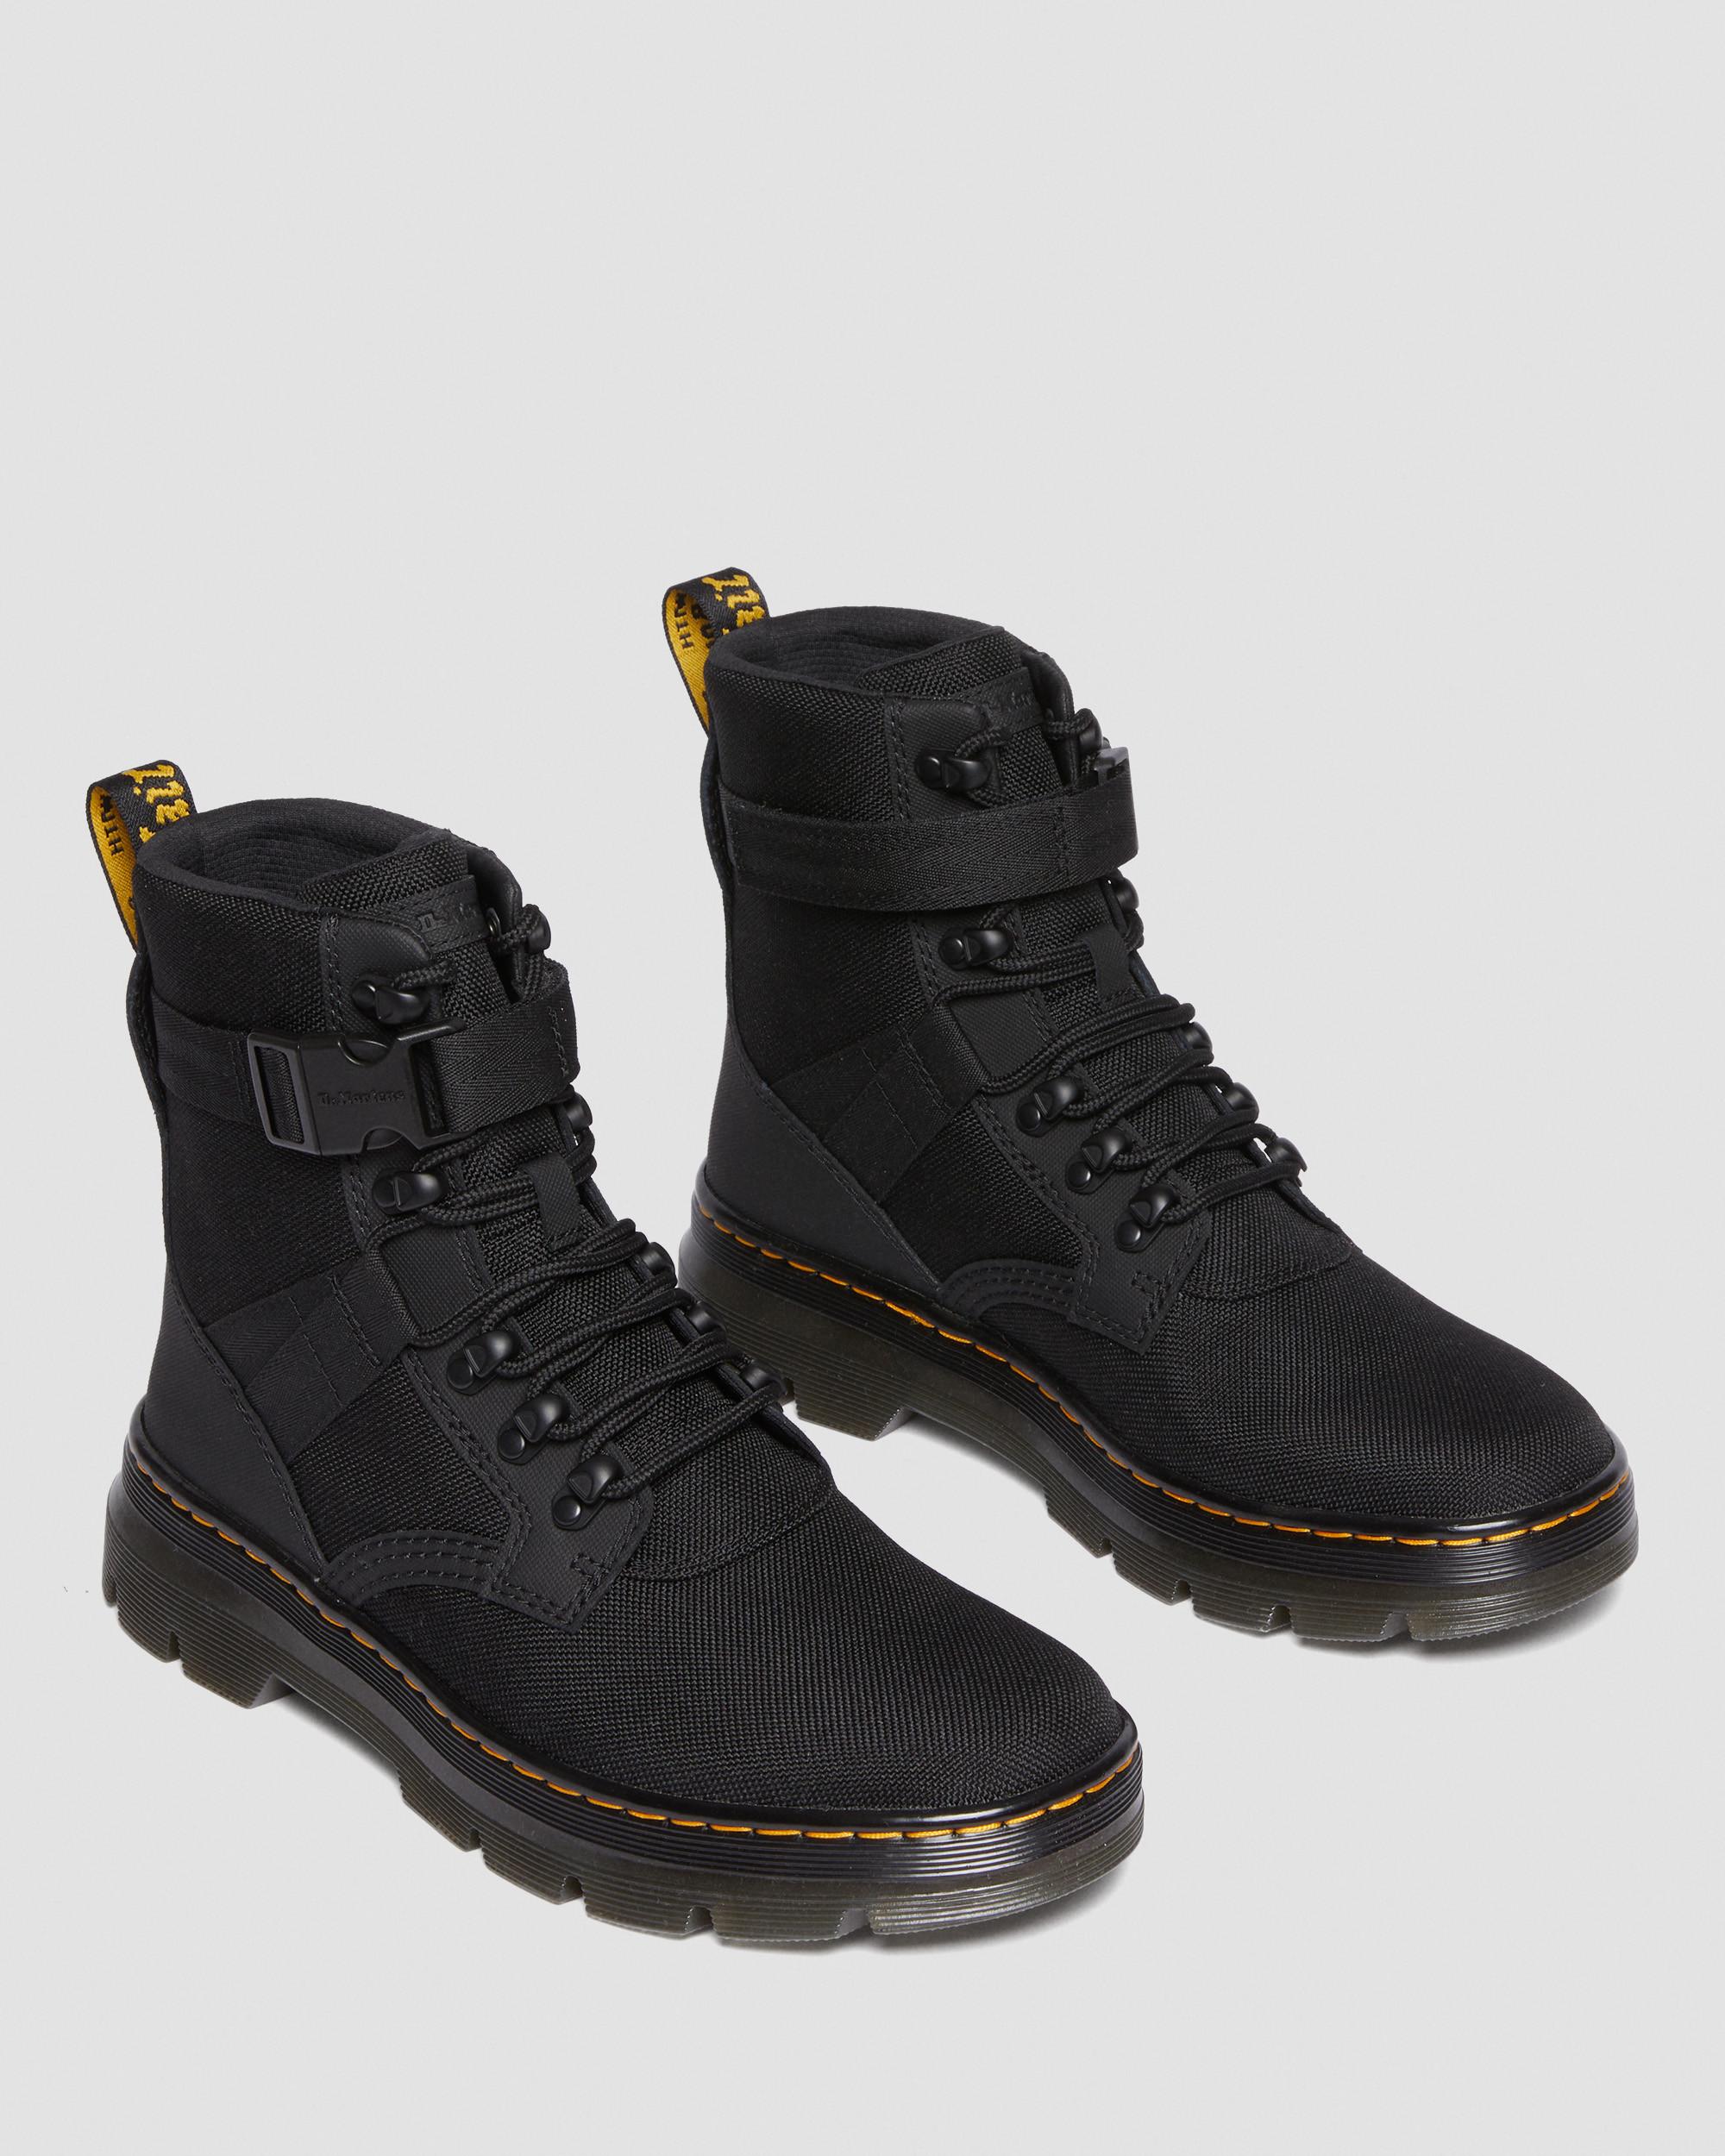 Audrick Nappa Lux Leather Platform Chelsea BootsCombs Tech II Extra Tough Utility Boots Dr. Martens